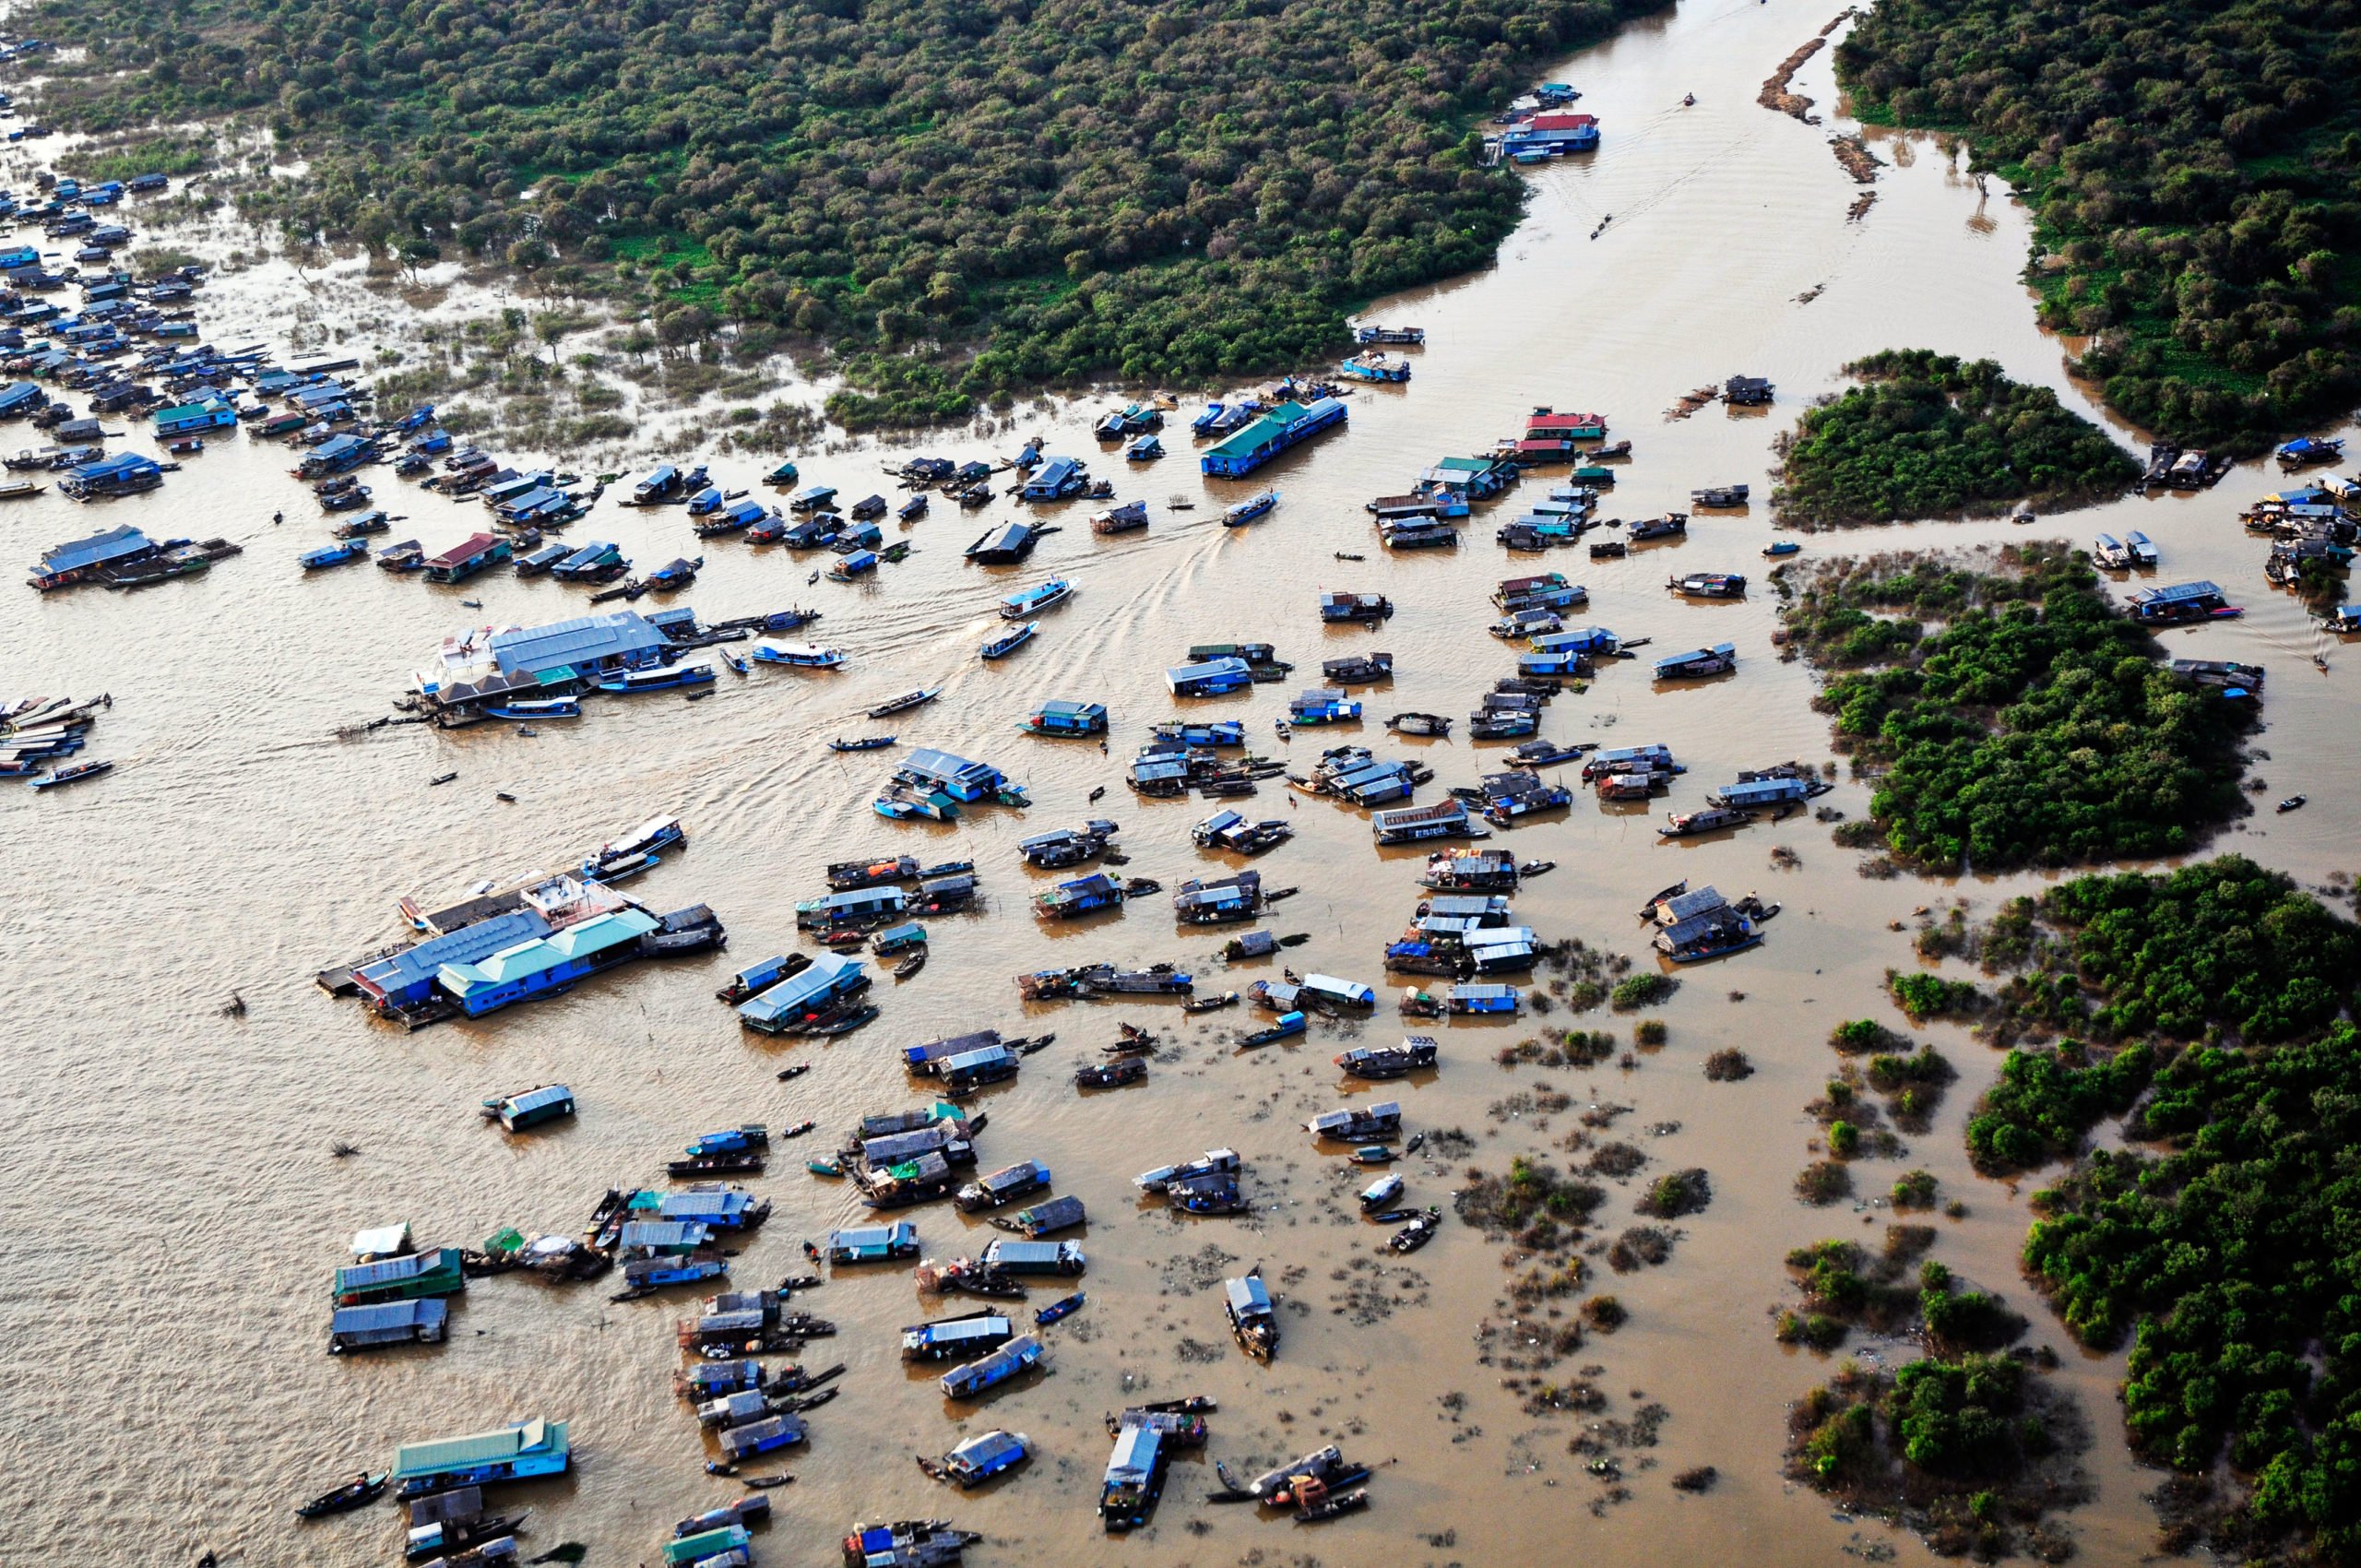 An aerial view of a floating village on the Tonle Sap lake in Cambodia (Image: Alamy)